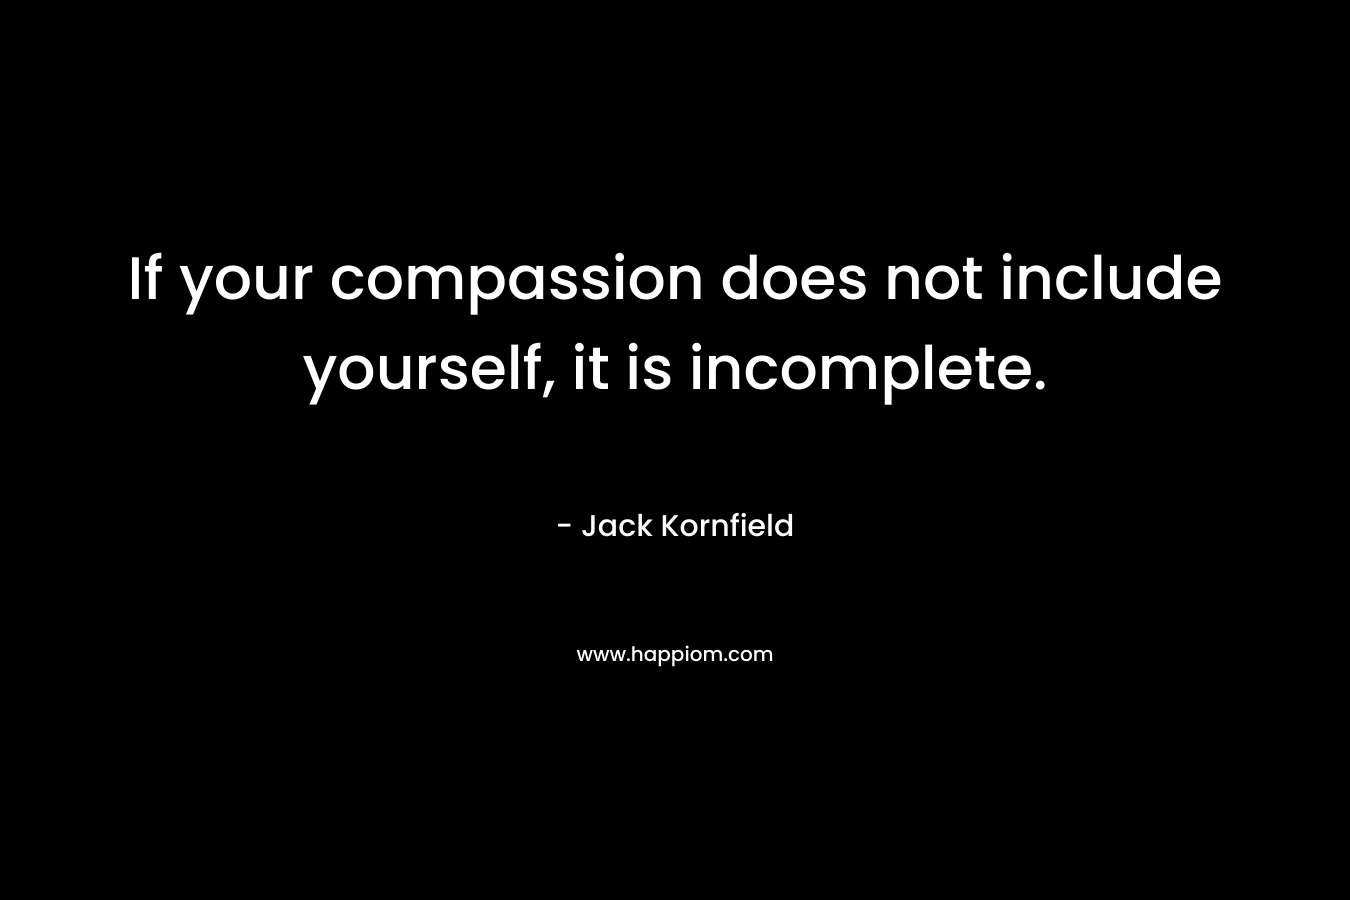 If your compassion does not include yourself, it is incomplete. – Jack Kornfield